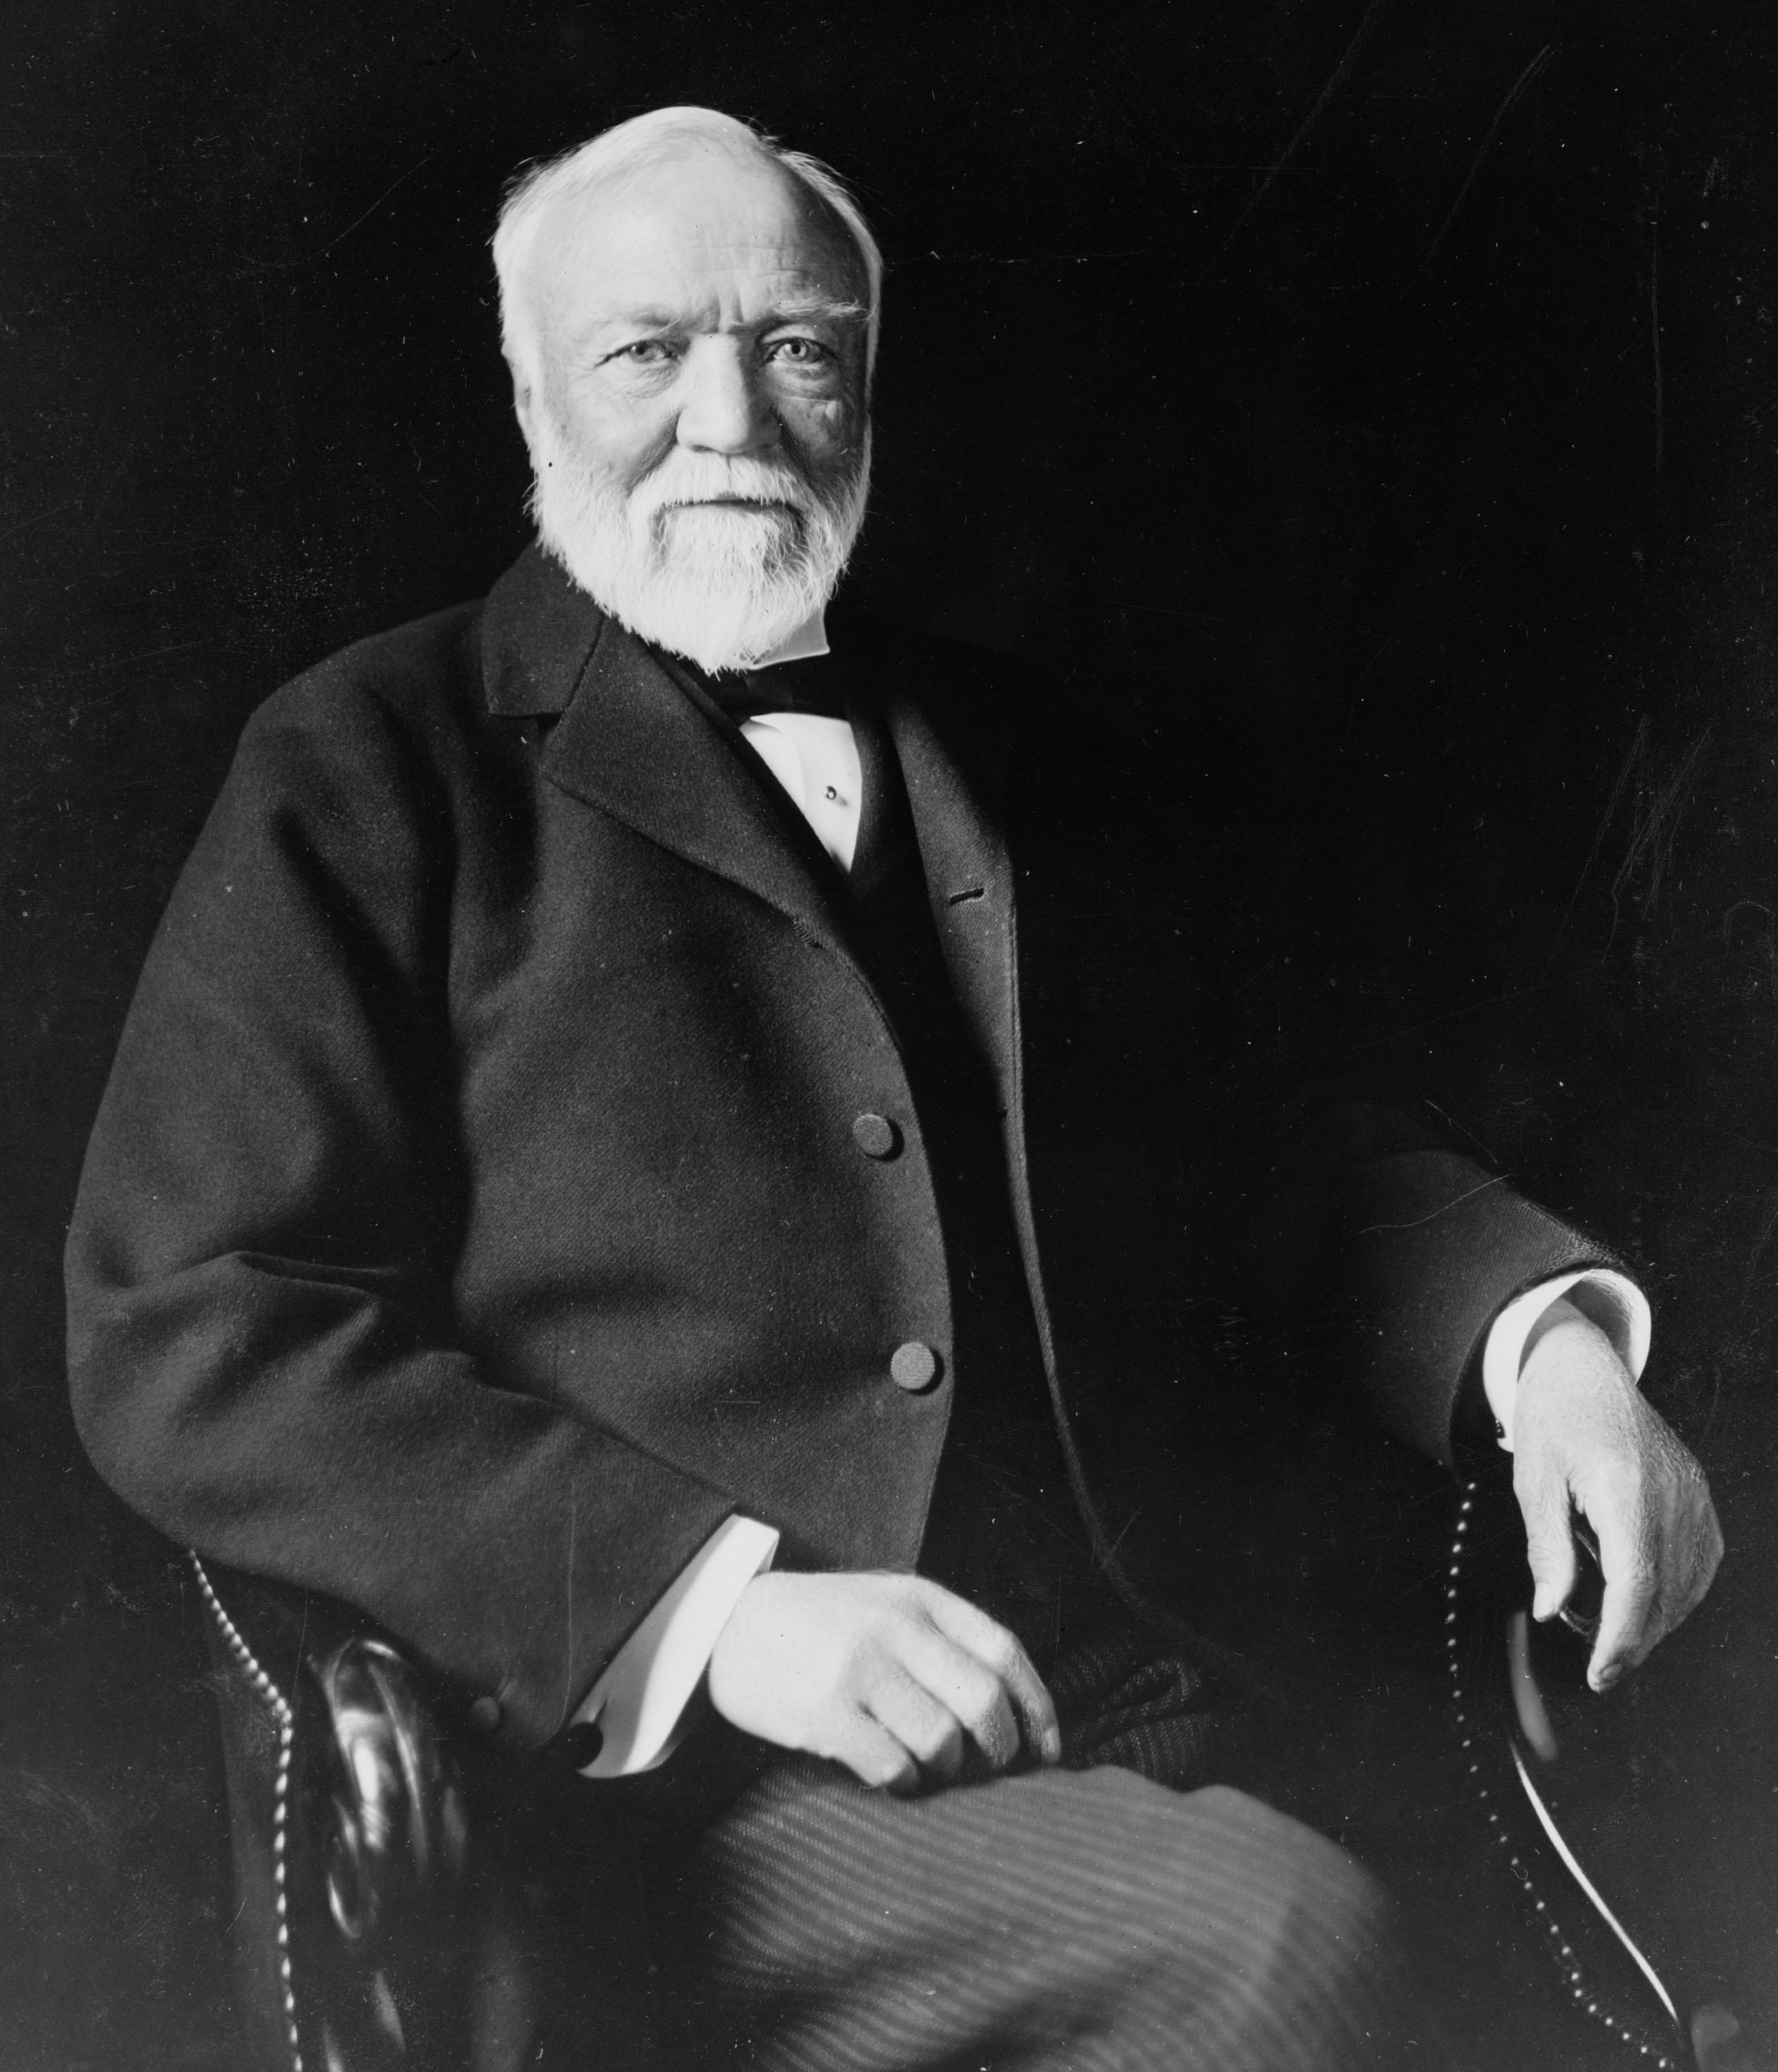 Andrew Carnegie, potential benefactor for Pickering's Mars mirrors. Theodore C. Marceau [Public domain], via Wikimedia Commons.